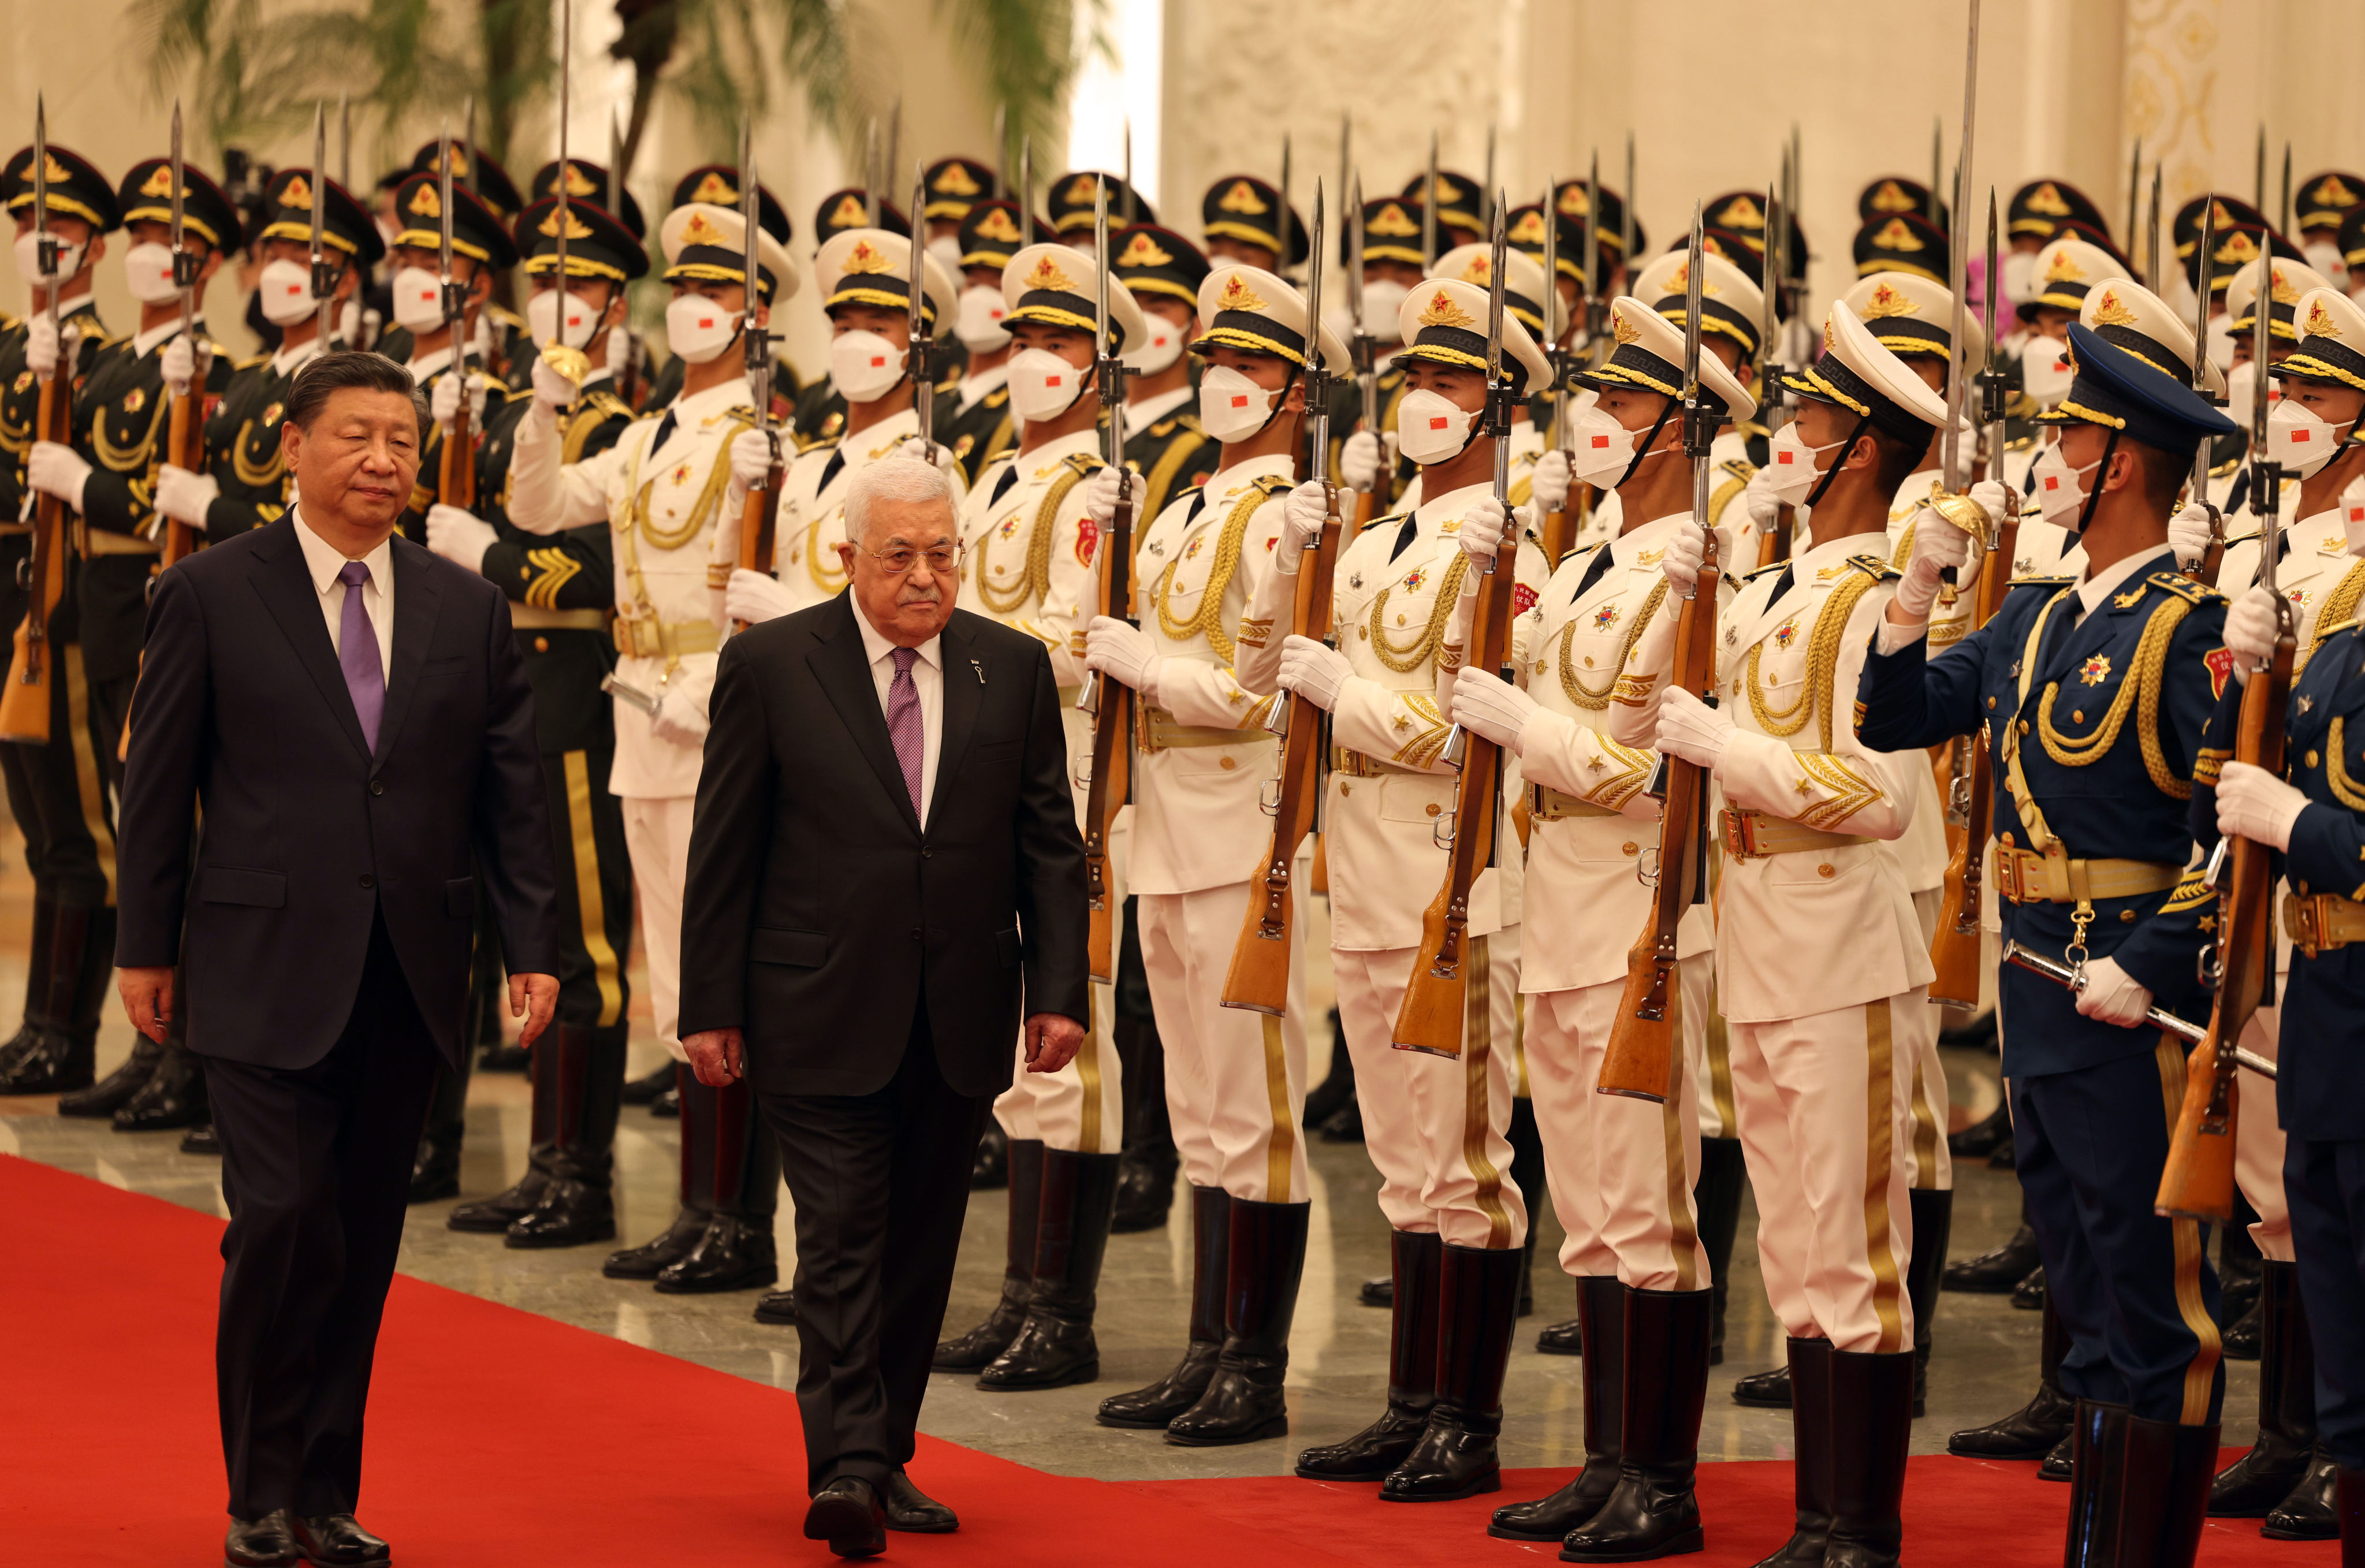 Chinese President Xi Jinping receives Palestinian President Mahmoud Abbas with military honours during a welcoming ceremony ahead of their meeting. Photo: dpa